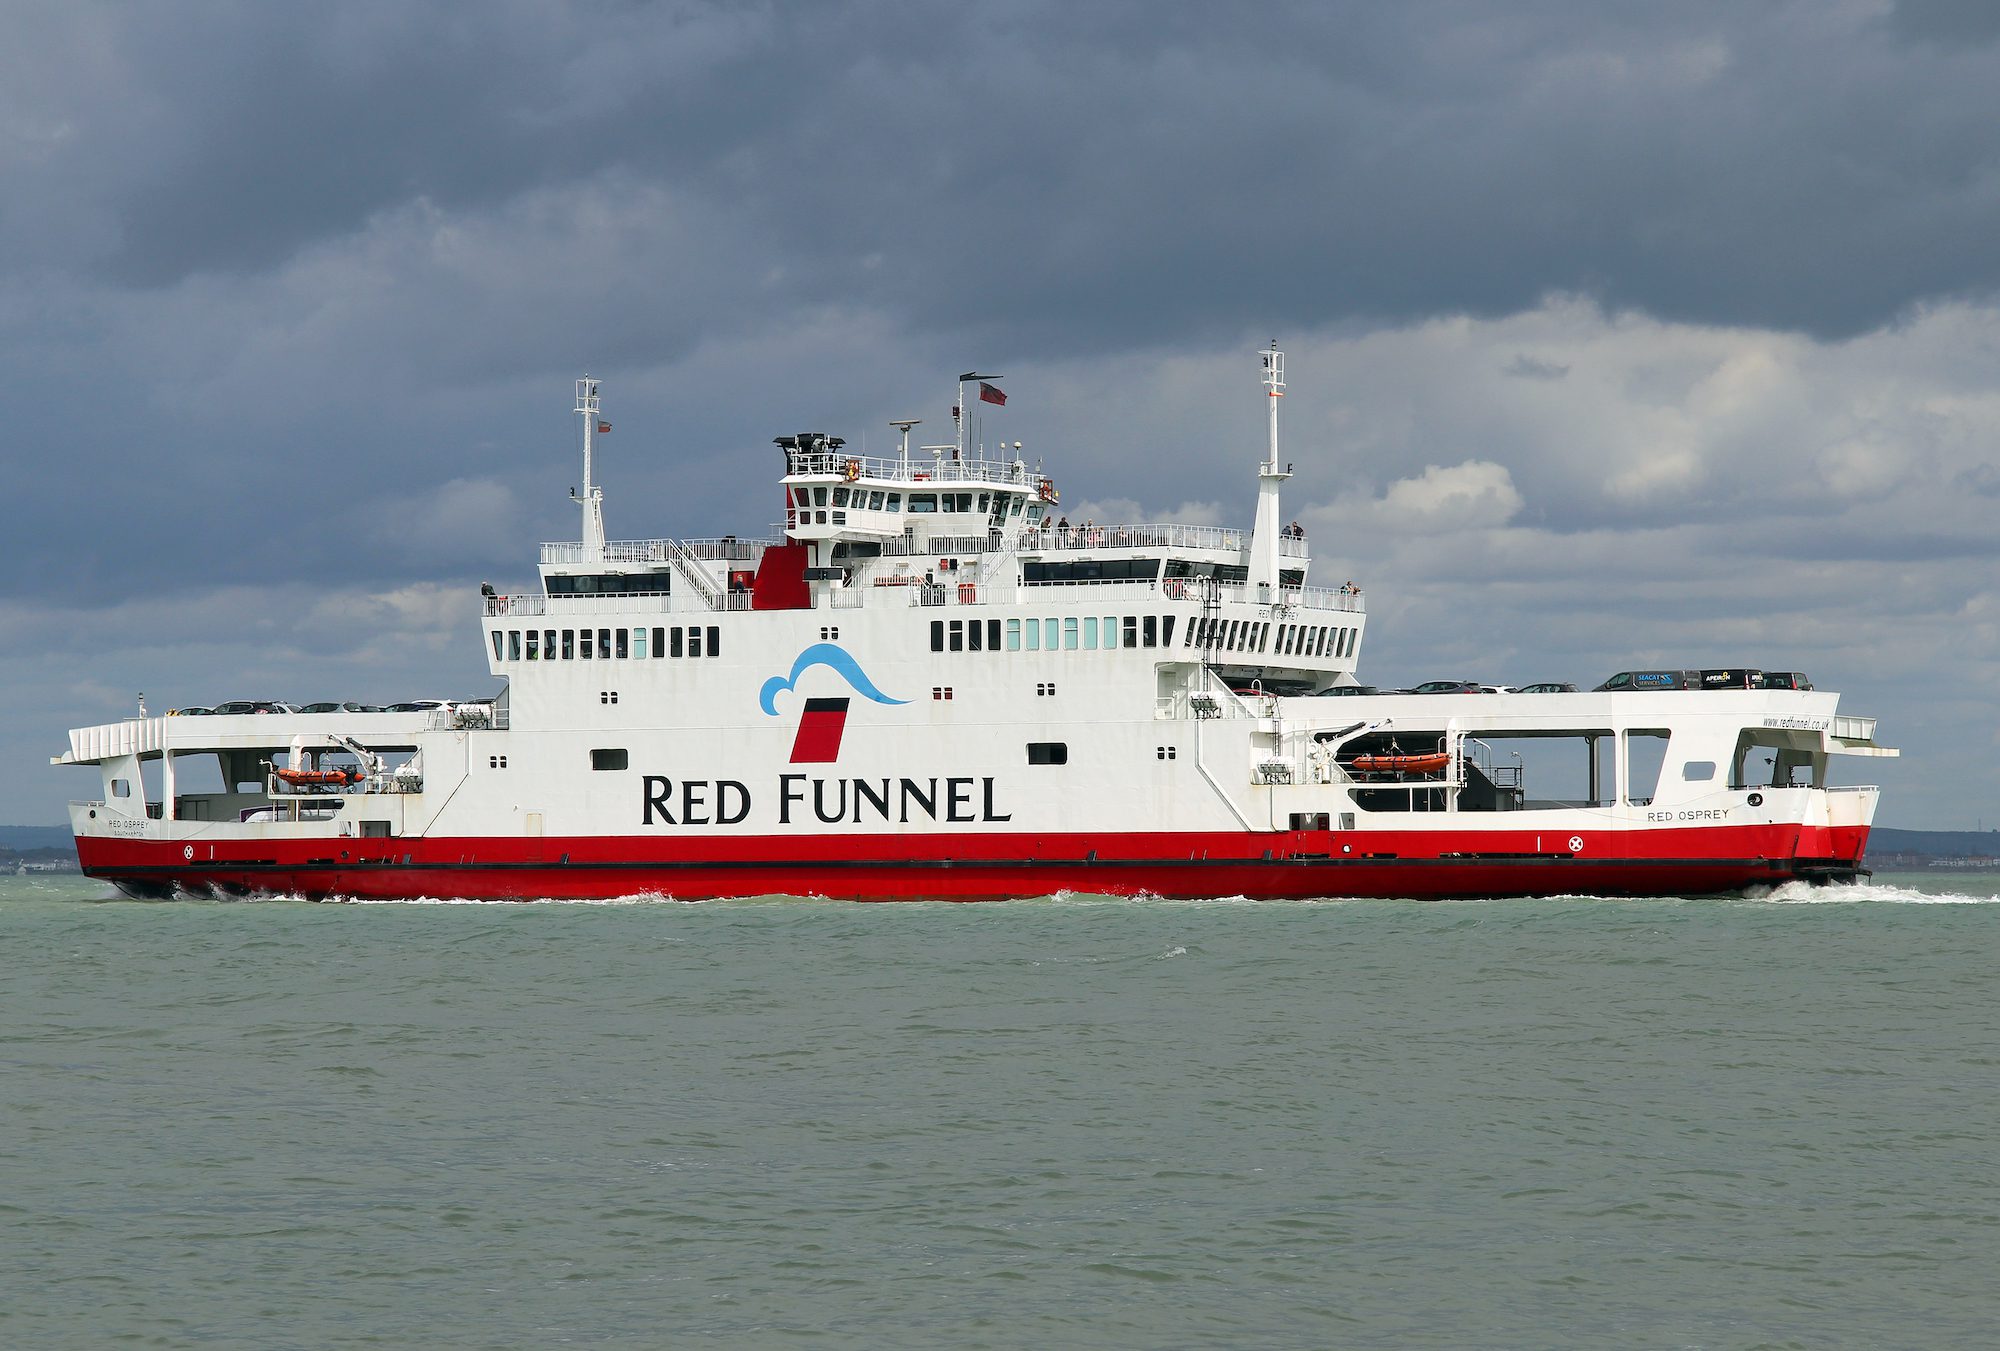 Stock image of a Red Funnel ferry. Dave Smith 1965 / Shutterstock.com